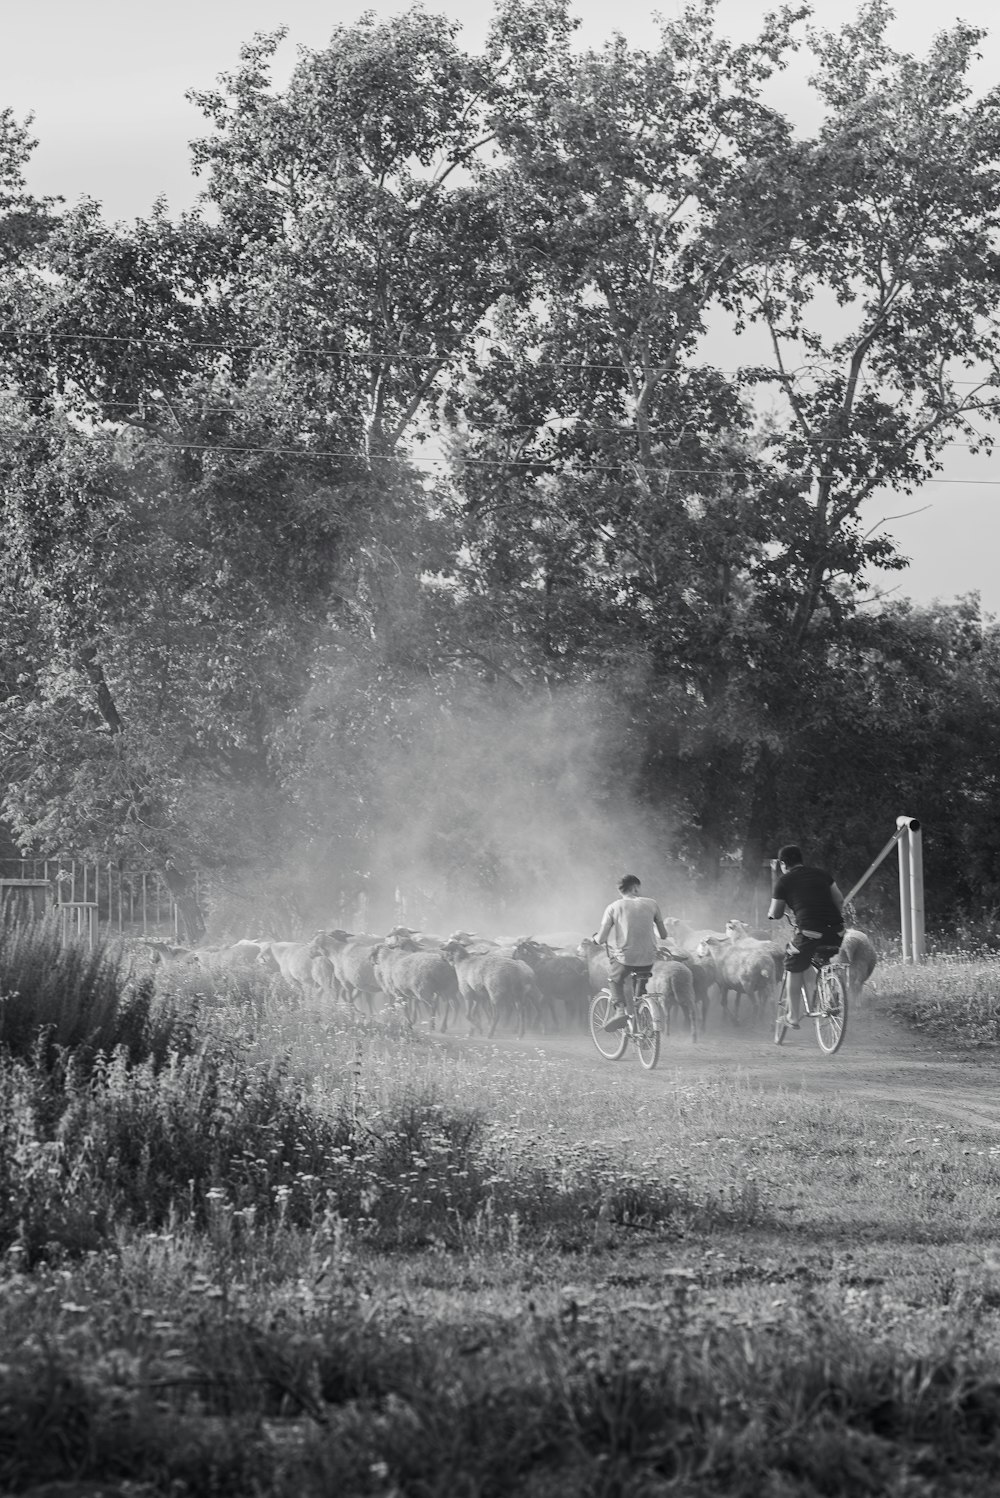 a black and white photo of a man on a bicycle with a herd of sheep